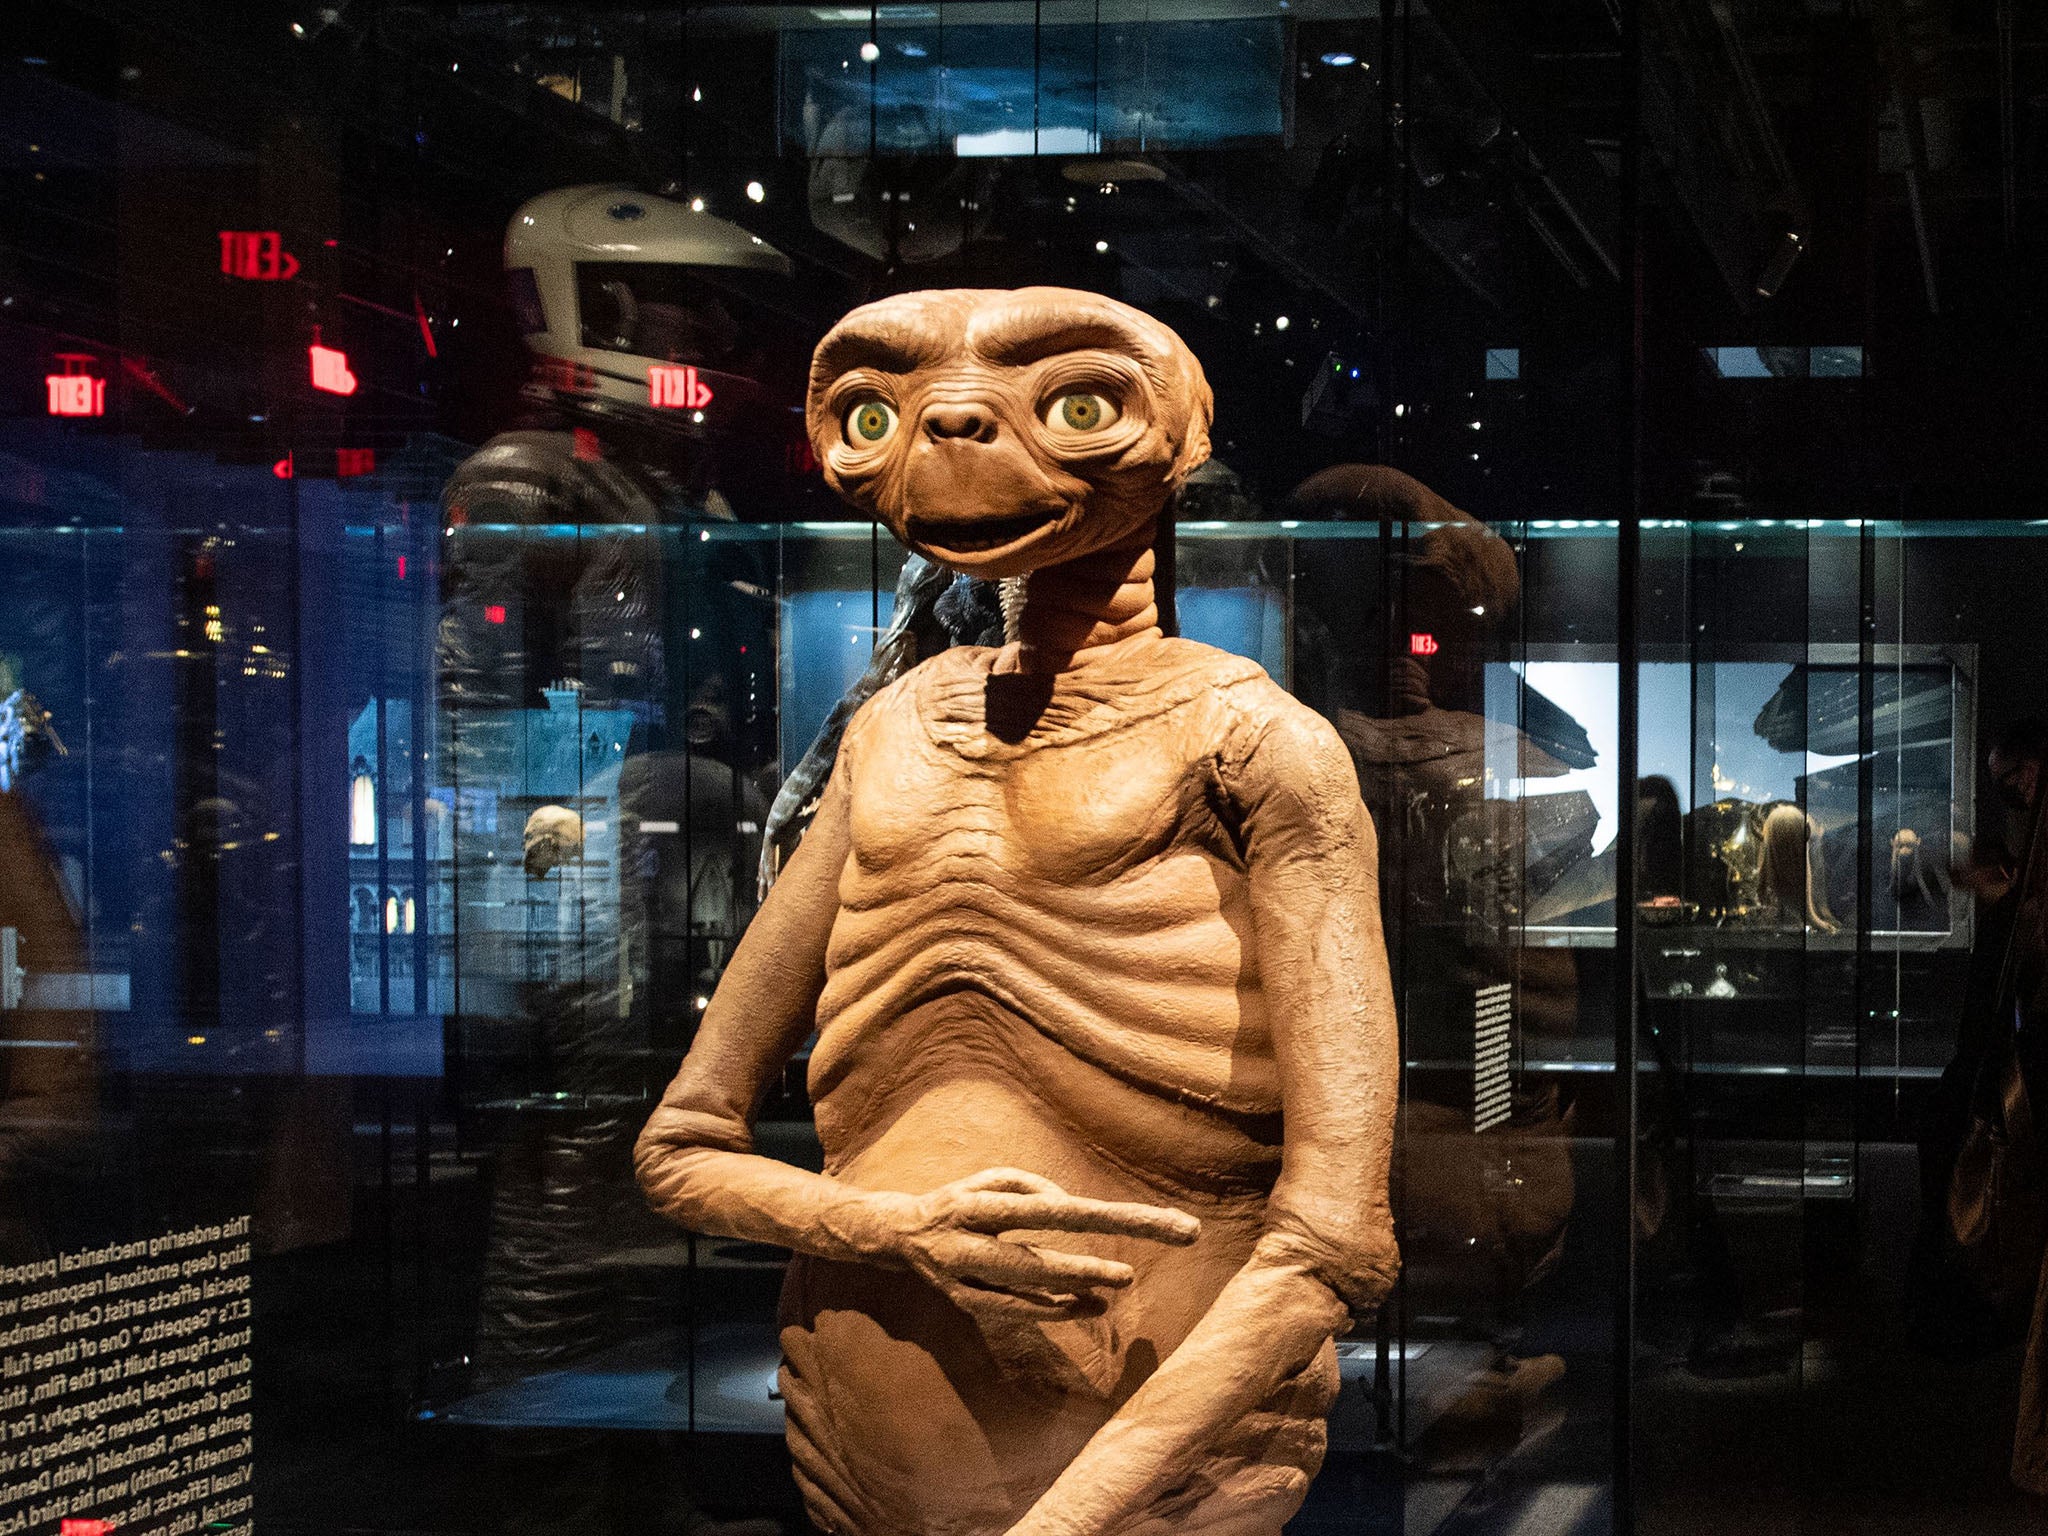 Artefacts of cinema, from such films as ‘ET’ and ‘Star Wars’ are displayed inside the Academy Museum Of Motion Pictures